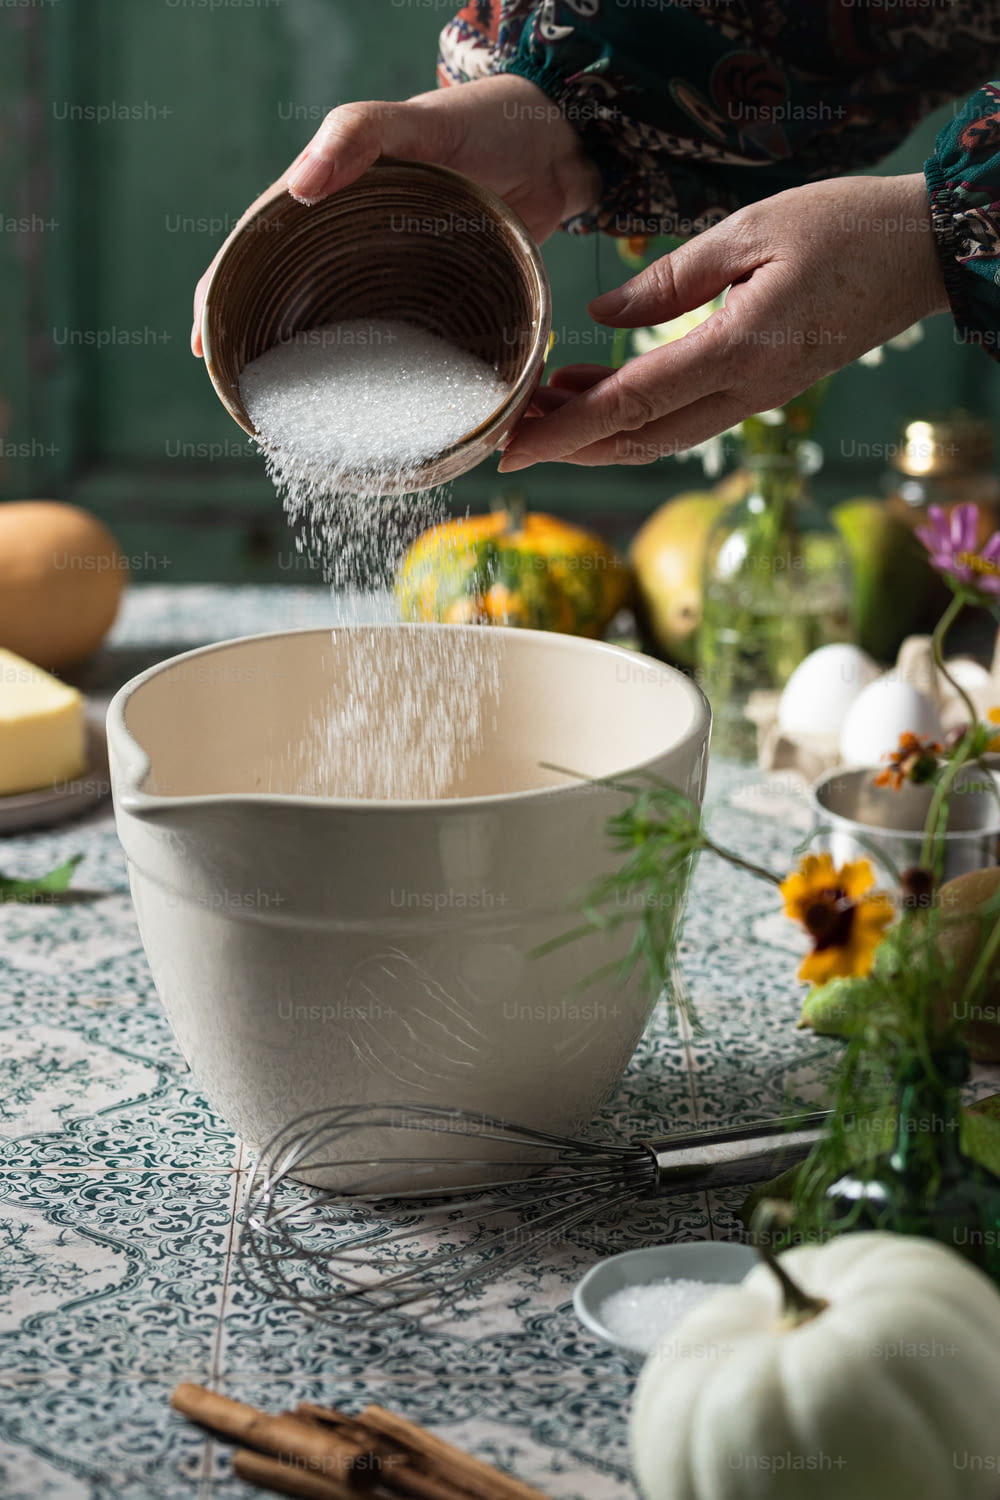 a person pouring sugar into a bowl on a table